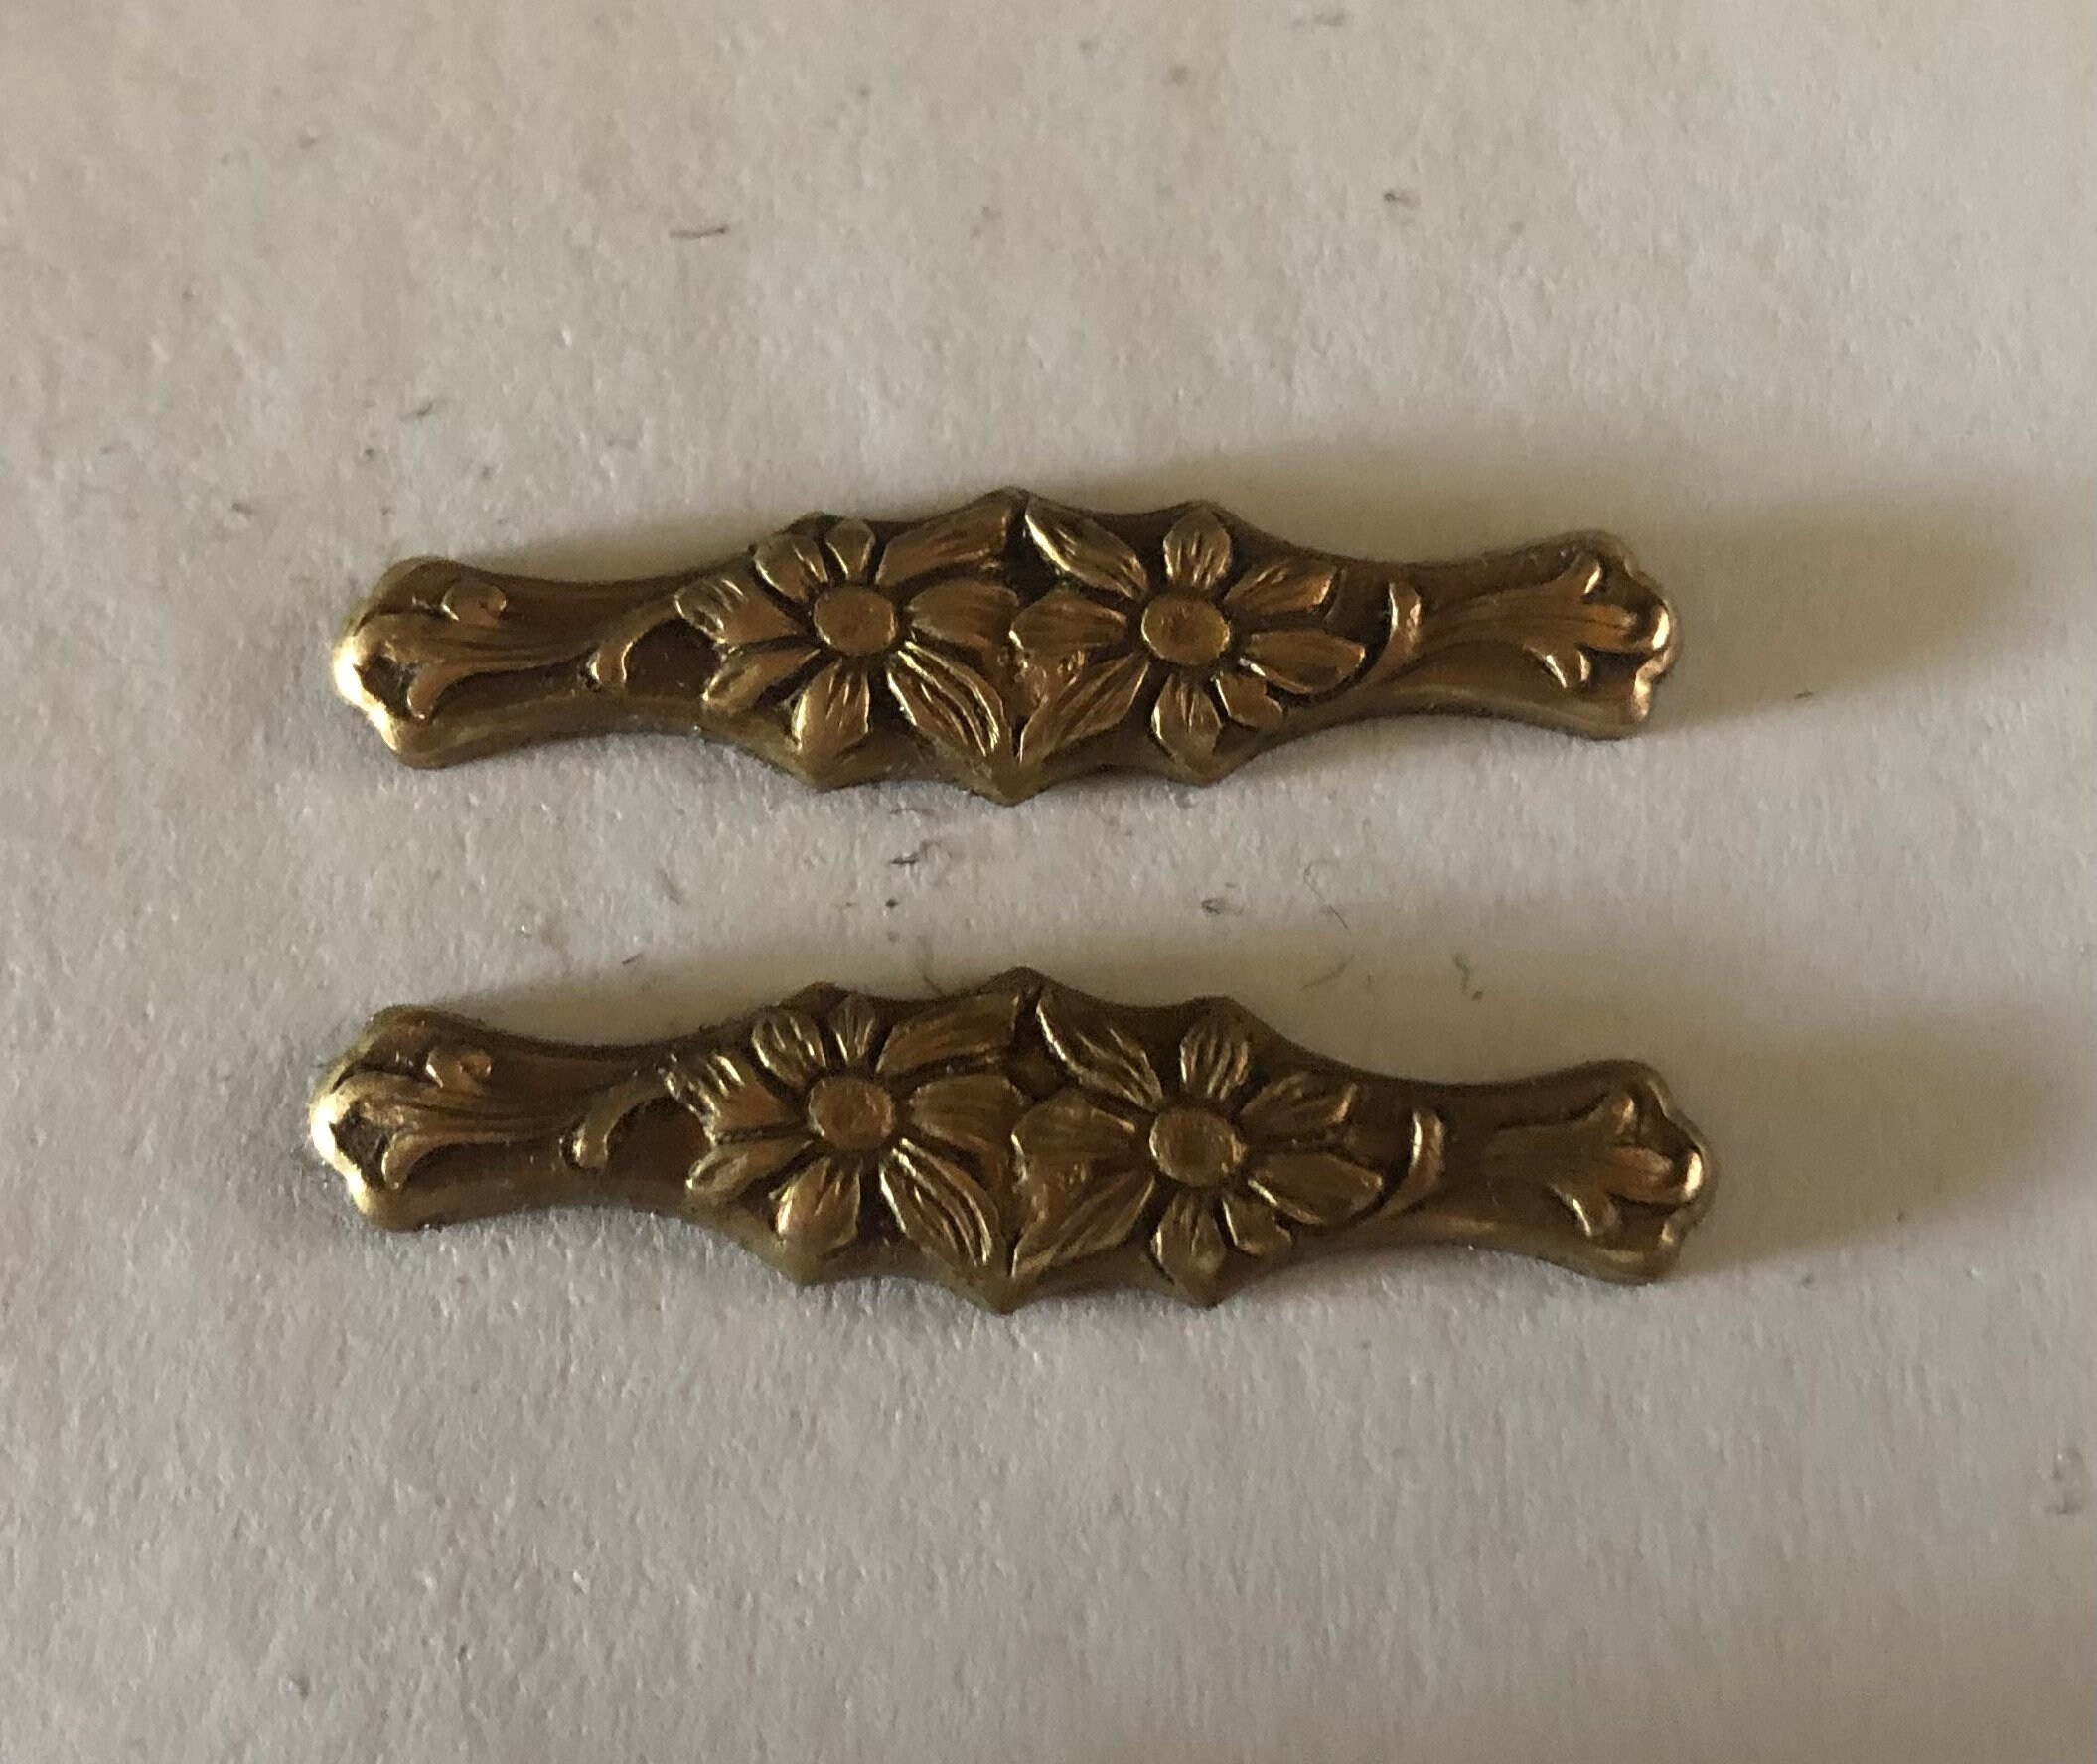 Brass, bronze, or gold colored solder? : r/StainedGlass